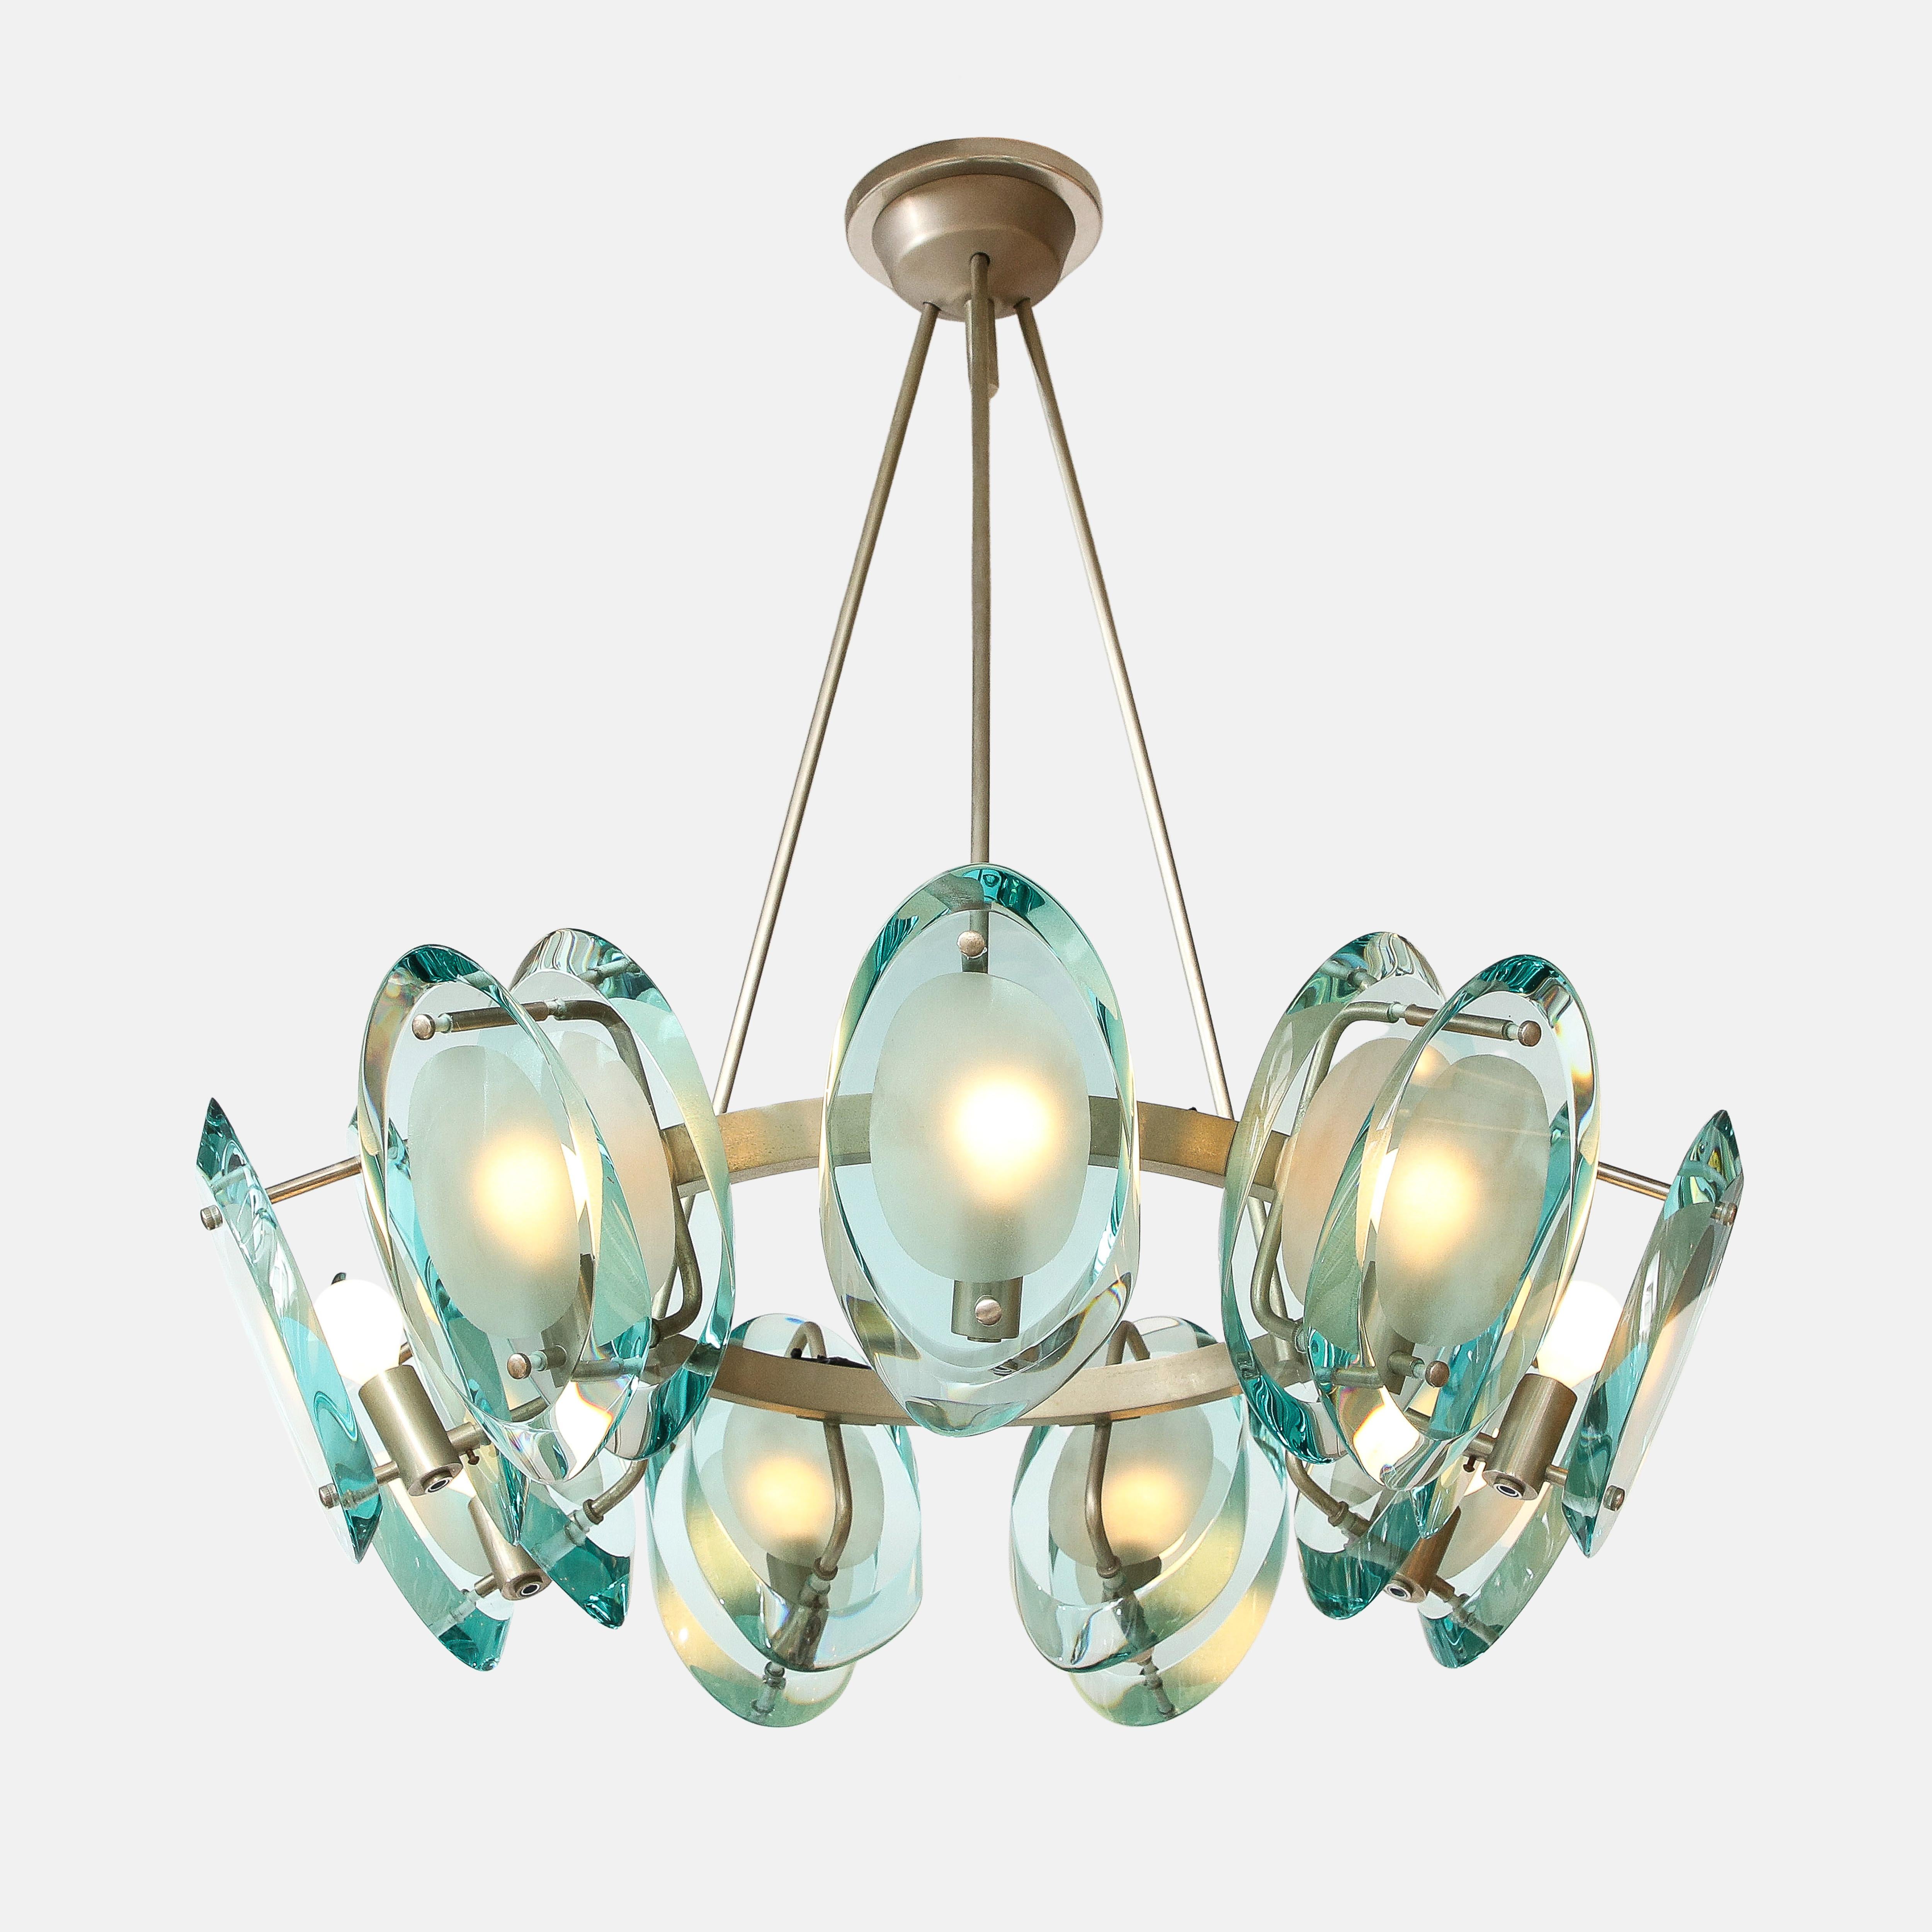 Max Ingrand for Fontana Arte rare and extraordinary chandelier model 2088 consisting of nine double lens cut panels of thick profiled polished glass with partially sand-blasted glass centers mounted on a circular nickel-plated brass structure with